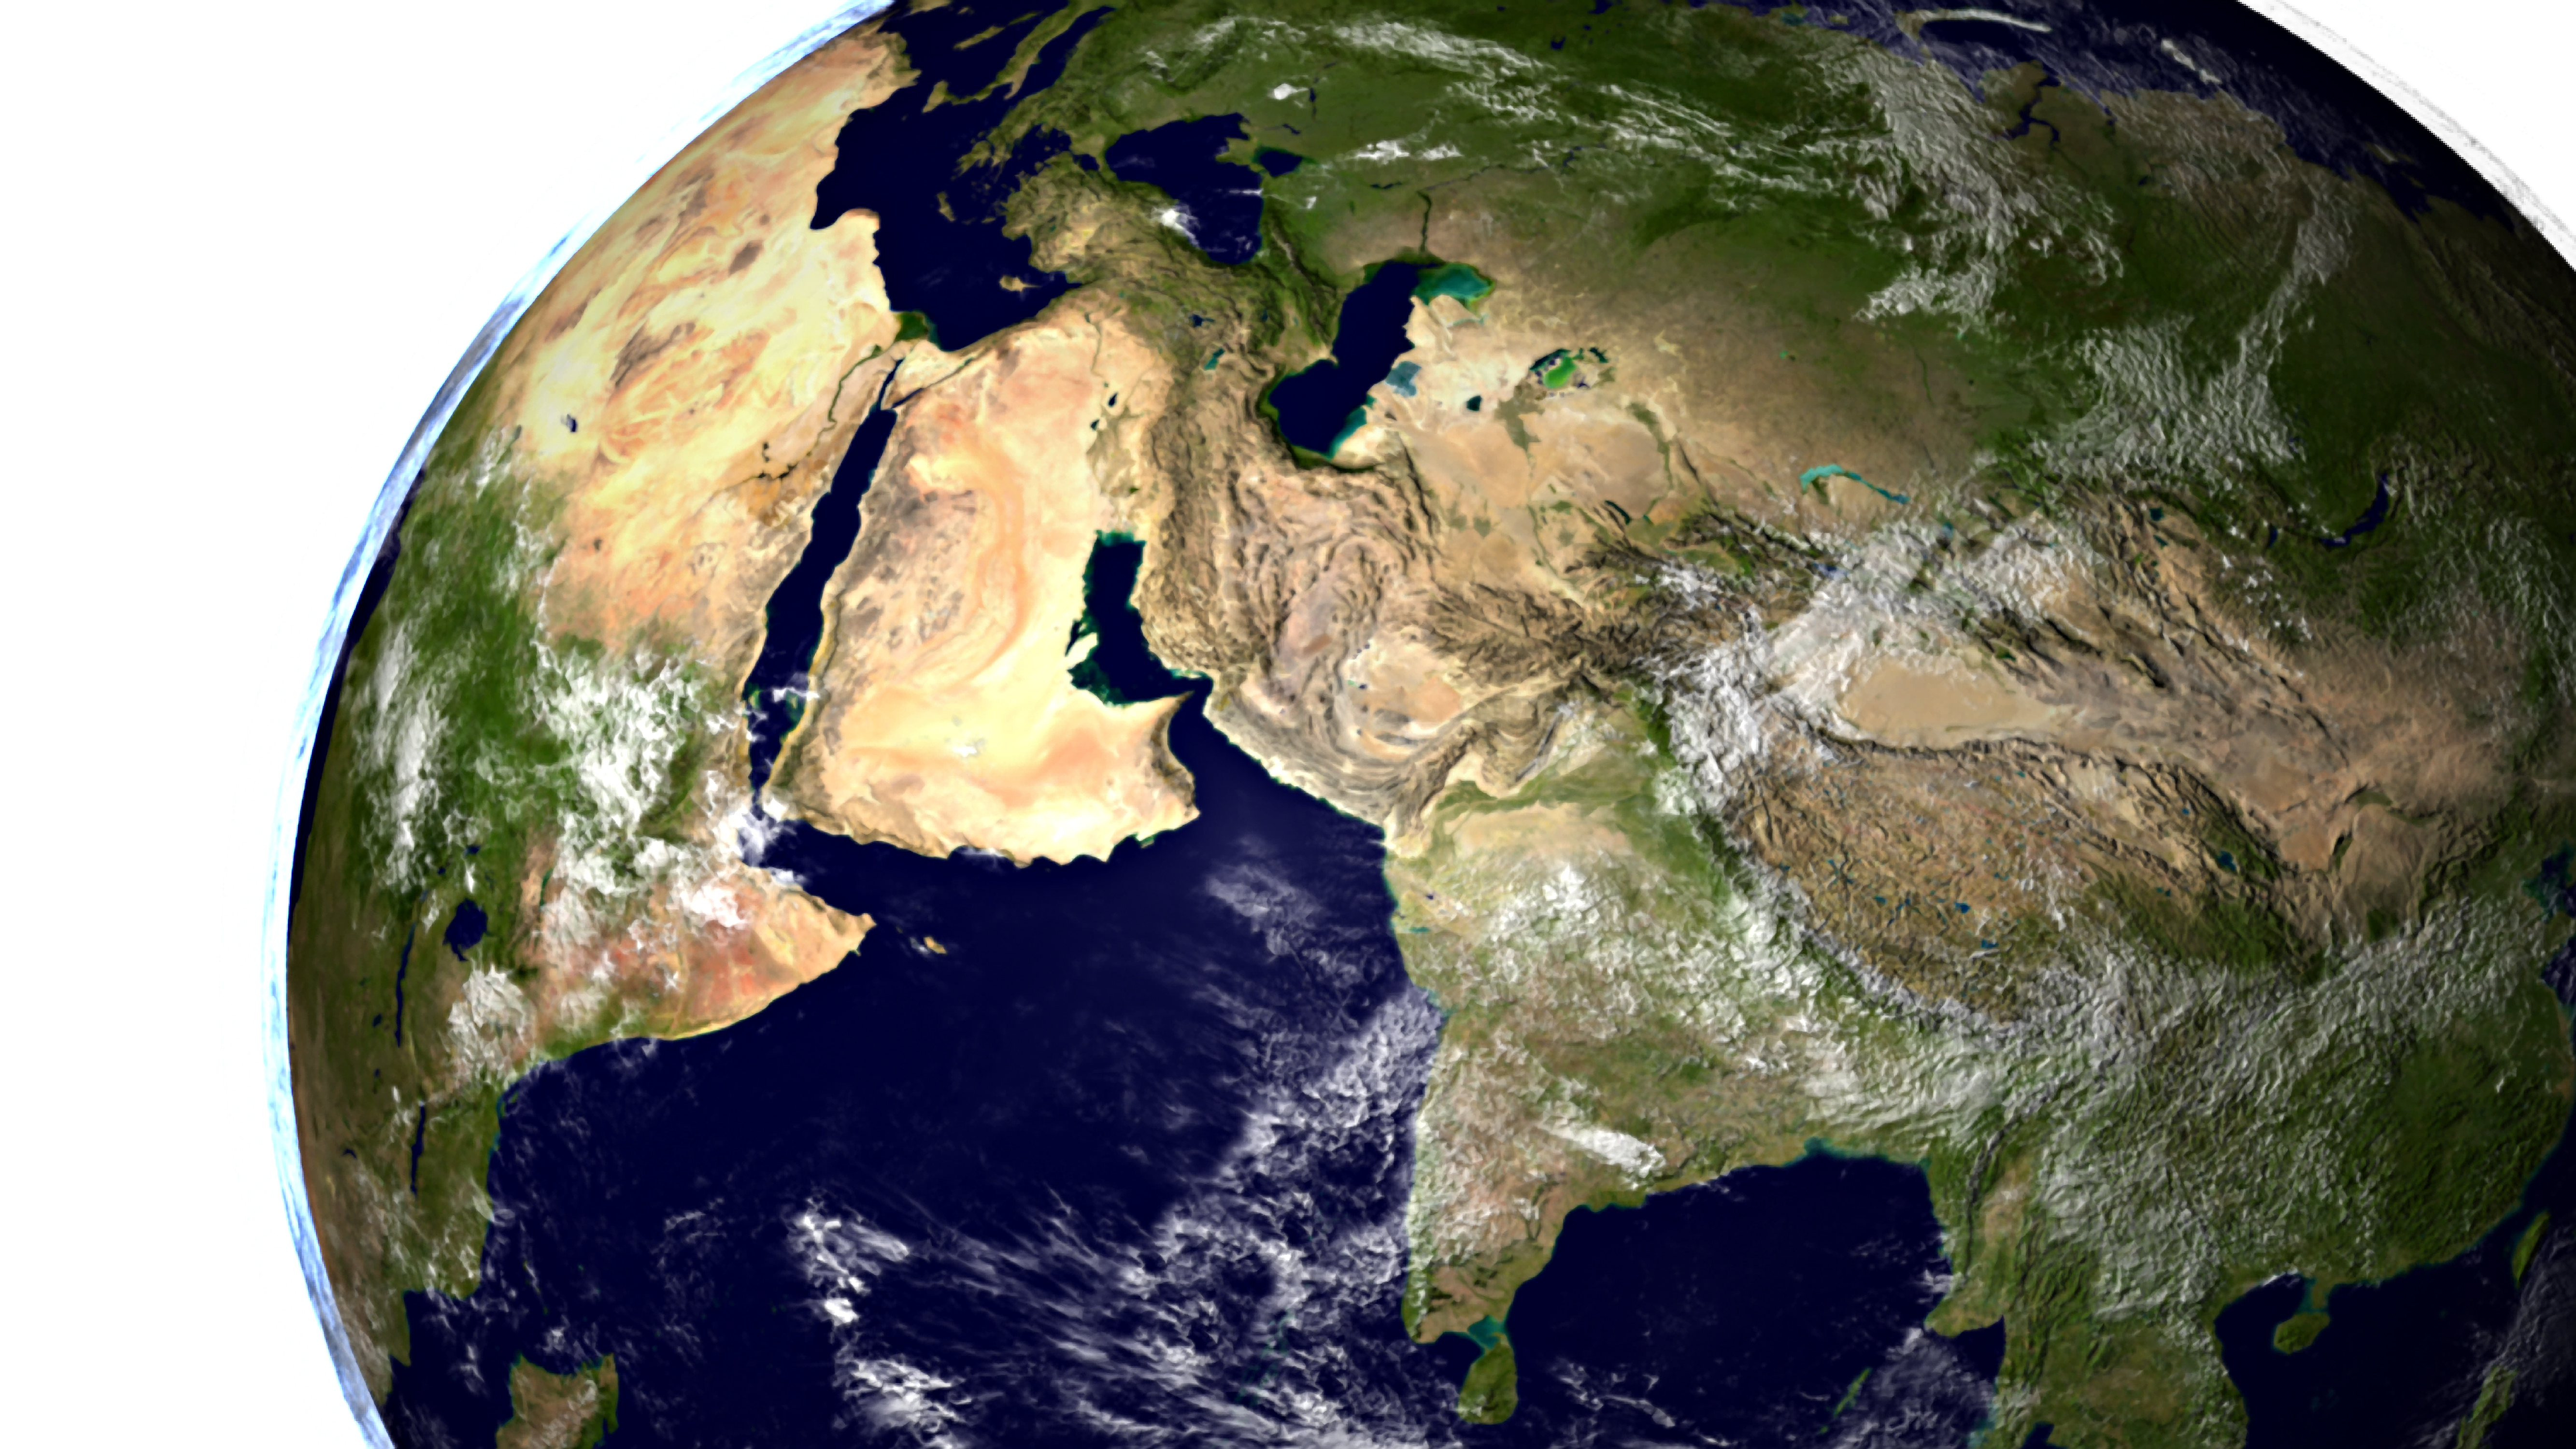 A still from the animation, “Global Precipitation Measurement (GPM) Mission: A fly up the Nile River in Egypt, then a pull-out into space,” showing Saudi Arabia, India, and the Caspian Sea. Image Credit: NASA Goddard Space Flight Center/Scientific Visualization Studio; Blue Marble Next Generation data is courtesy of Reto Stockli (Goddard) and NASA’s Earth Observatory.